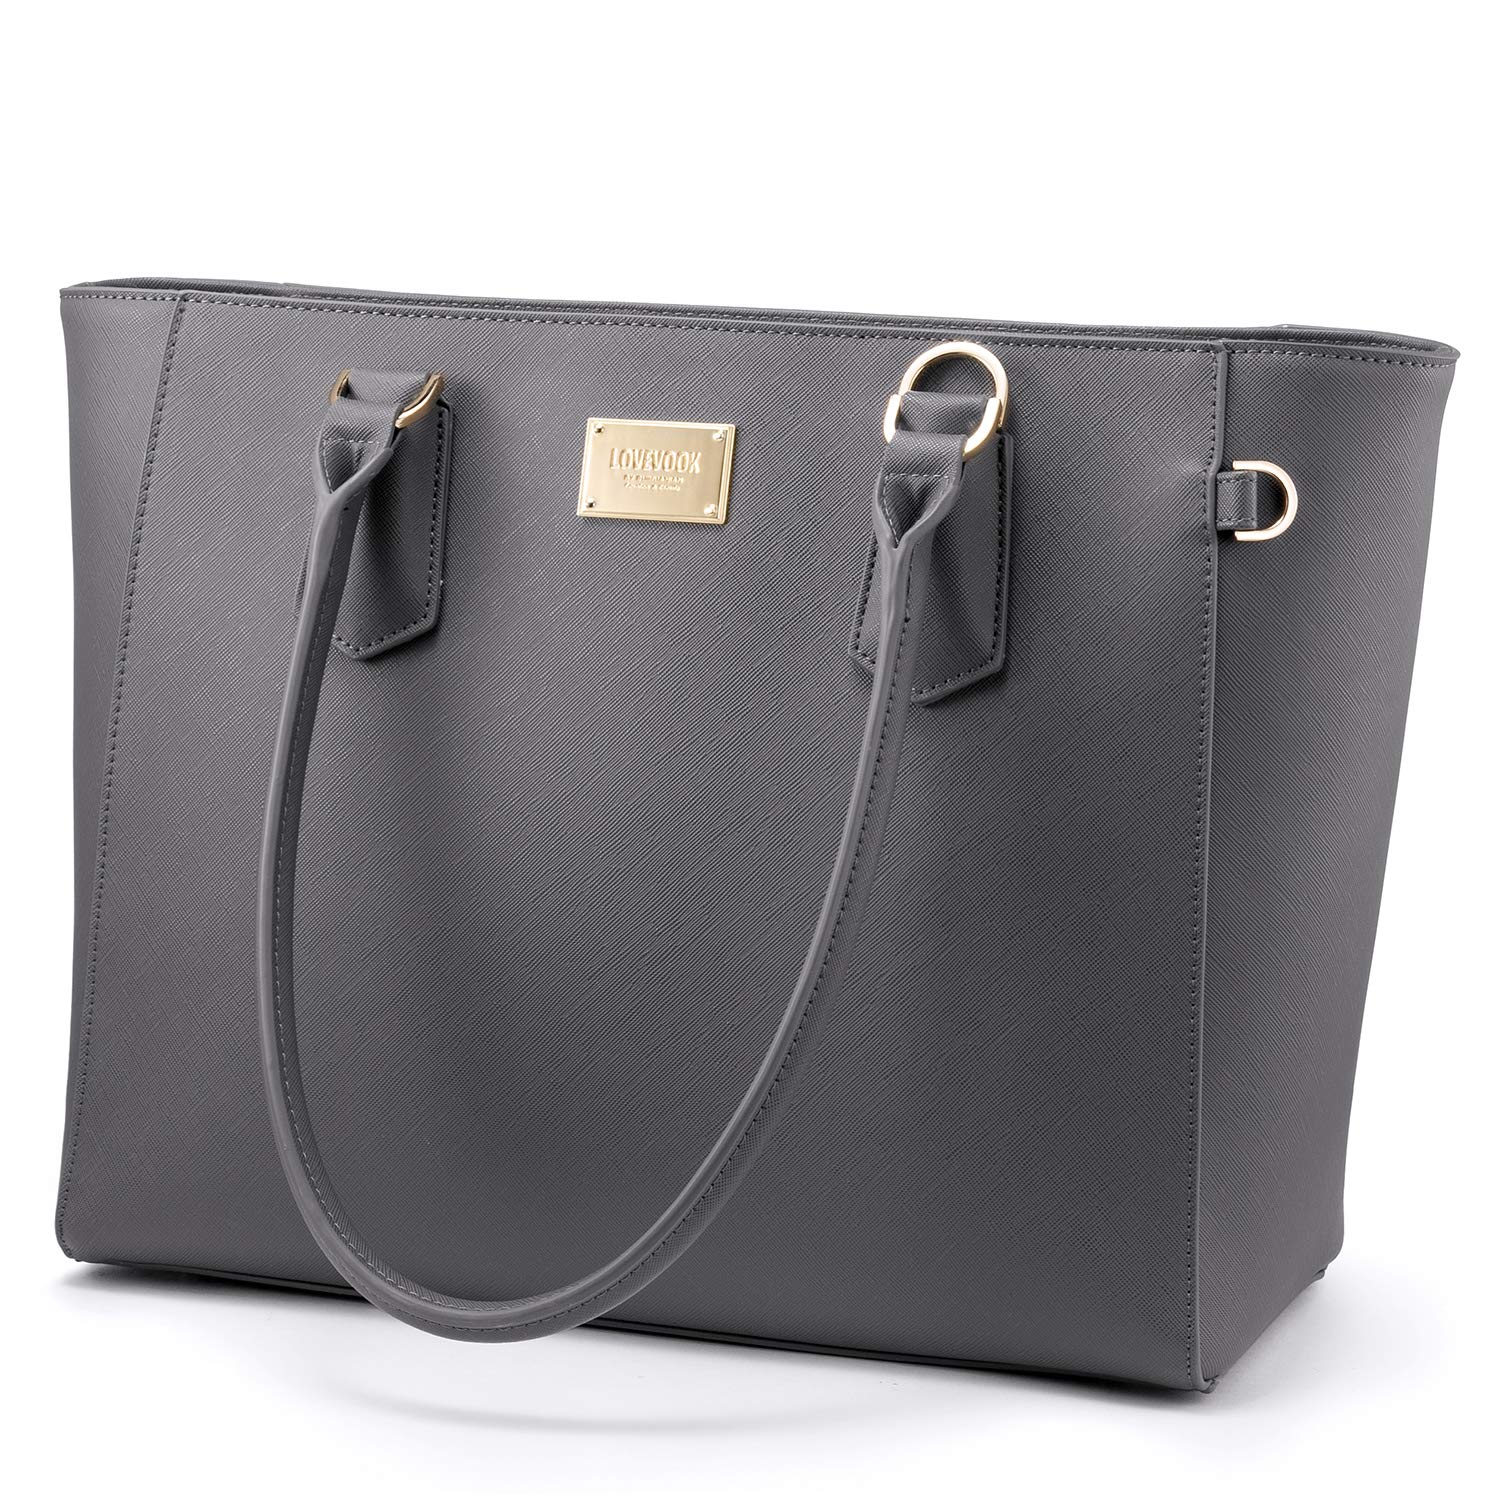 Laptop Bag for Women Large Office Handbags Briefcase Fits Up to 15.6 inch Grey